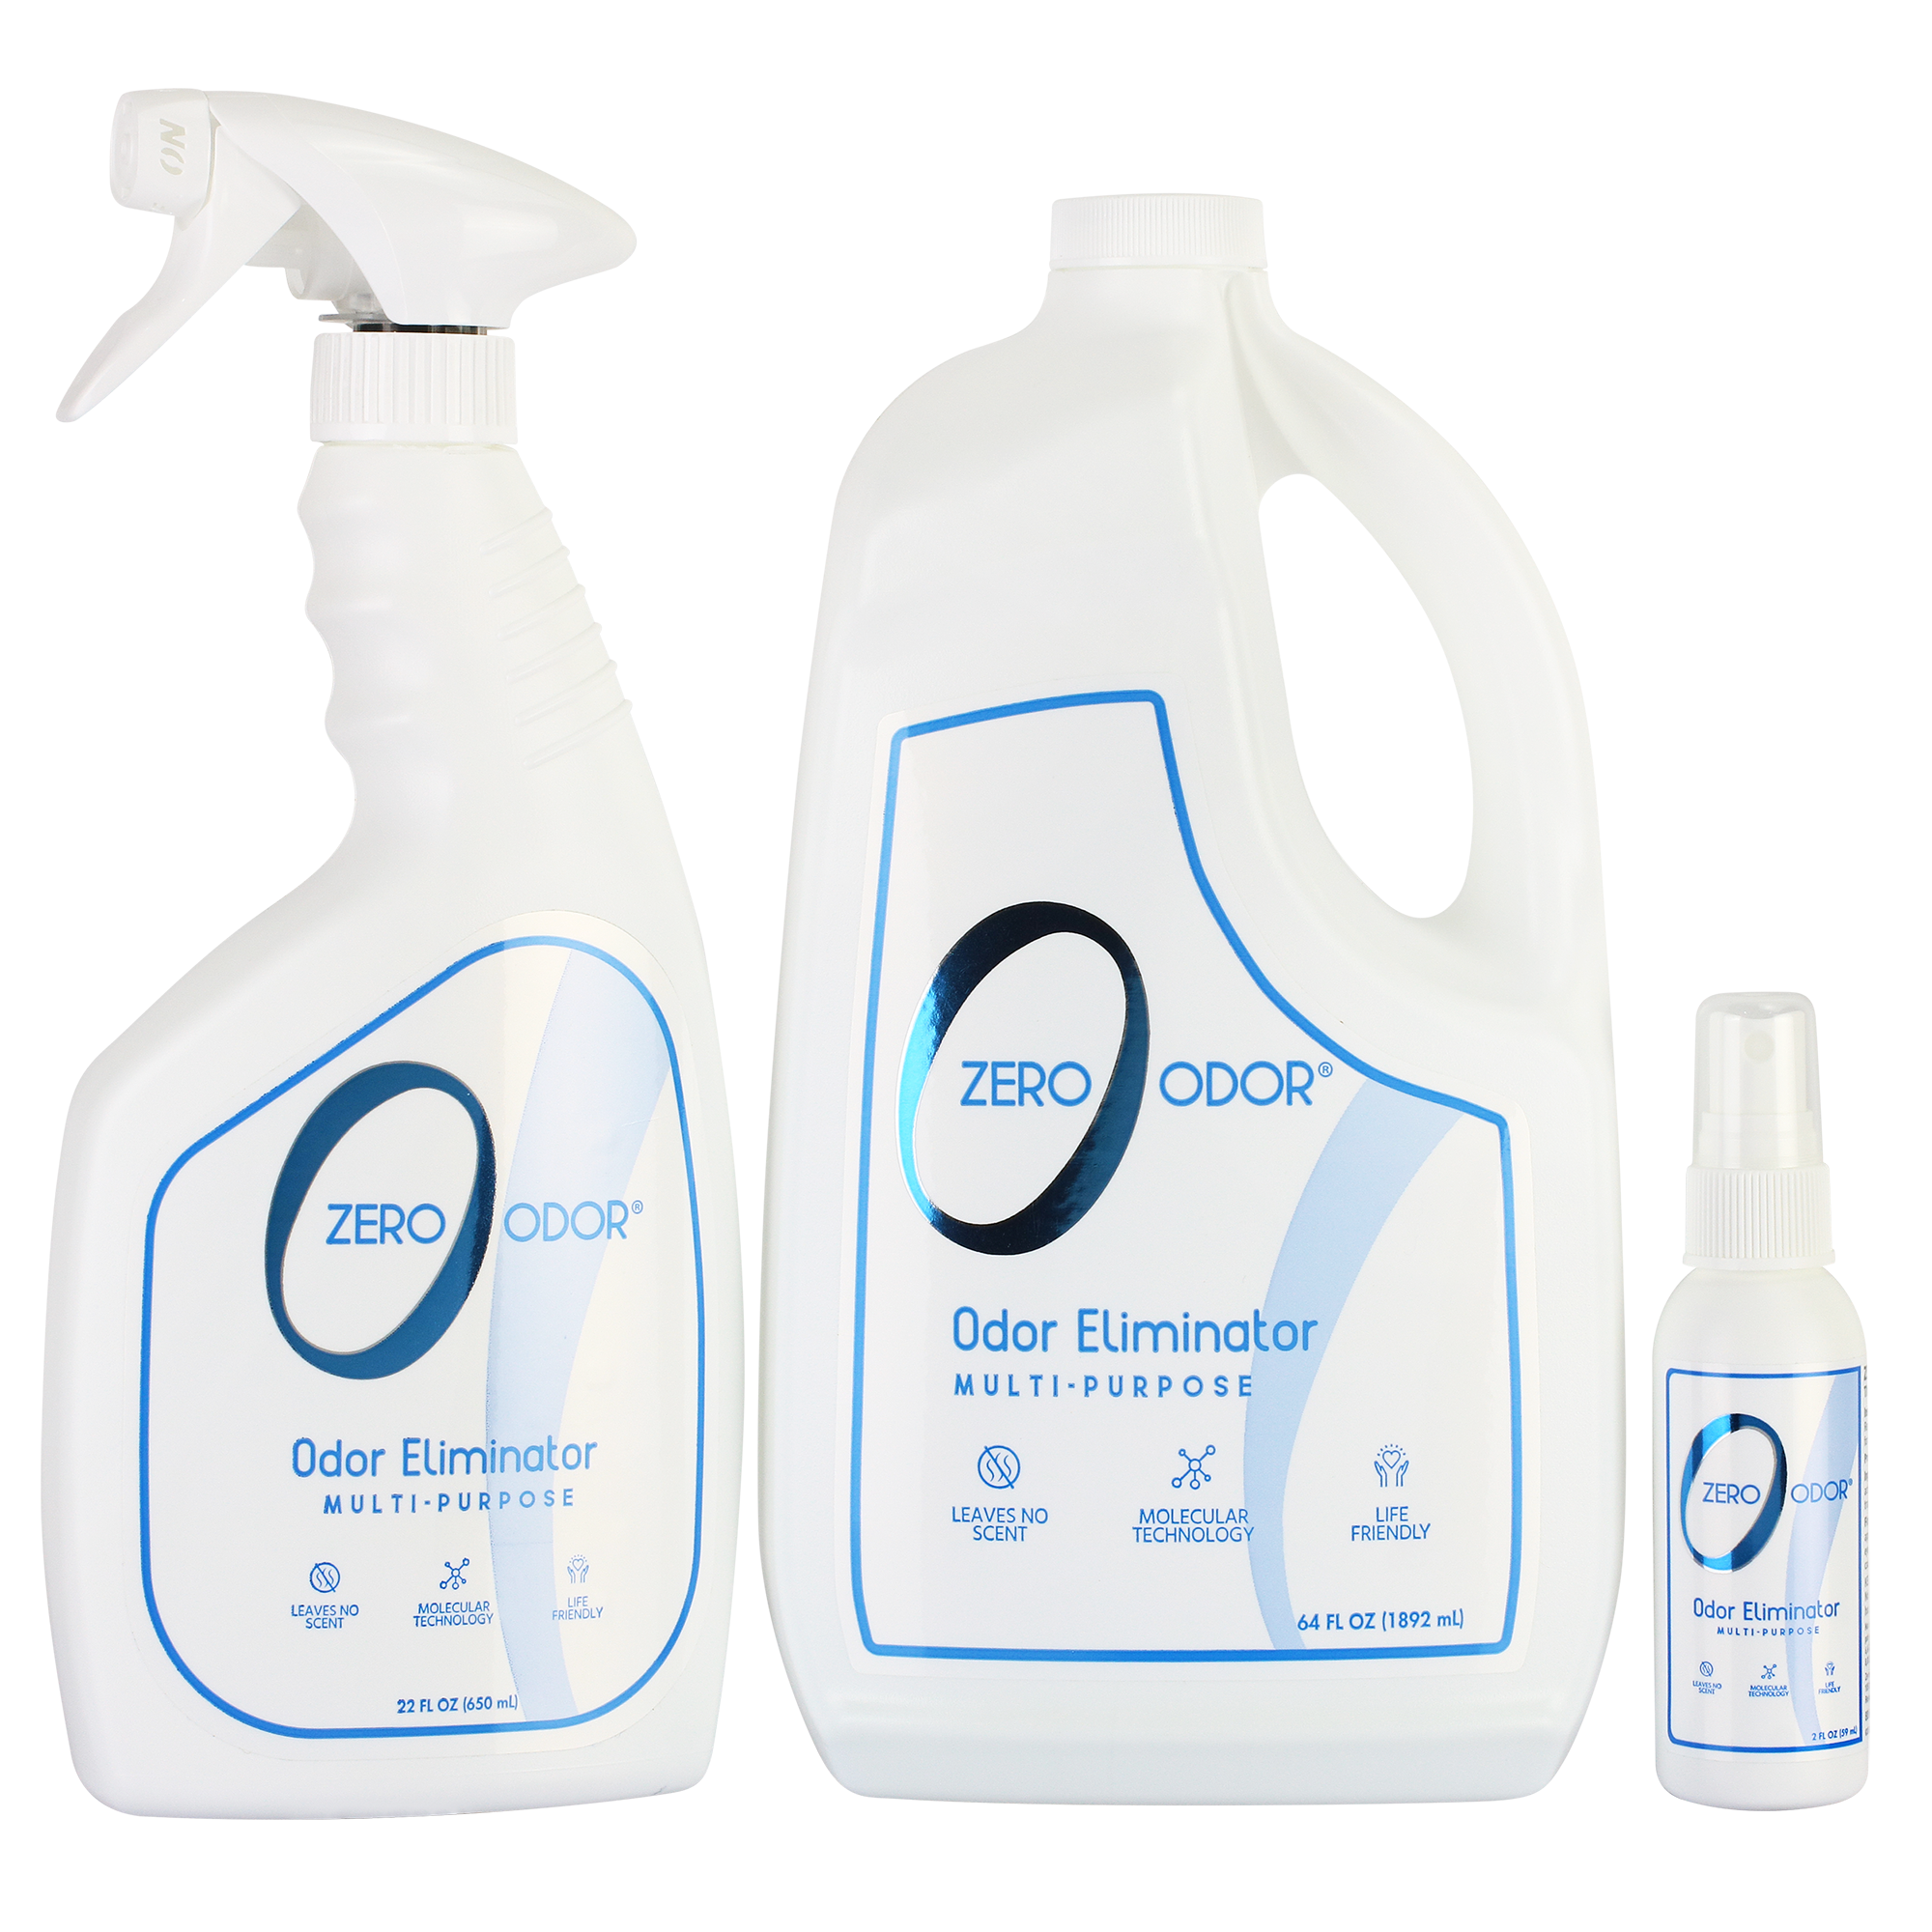 Rivers New Scent (Clean & Fresh) Car Refresher, Odor Eliminator - 200ml.